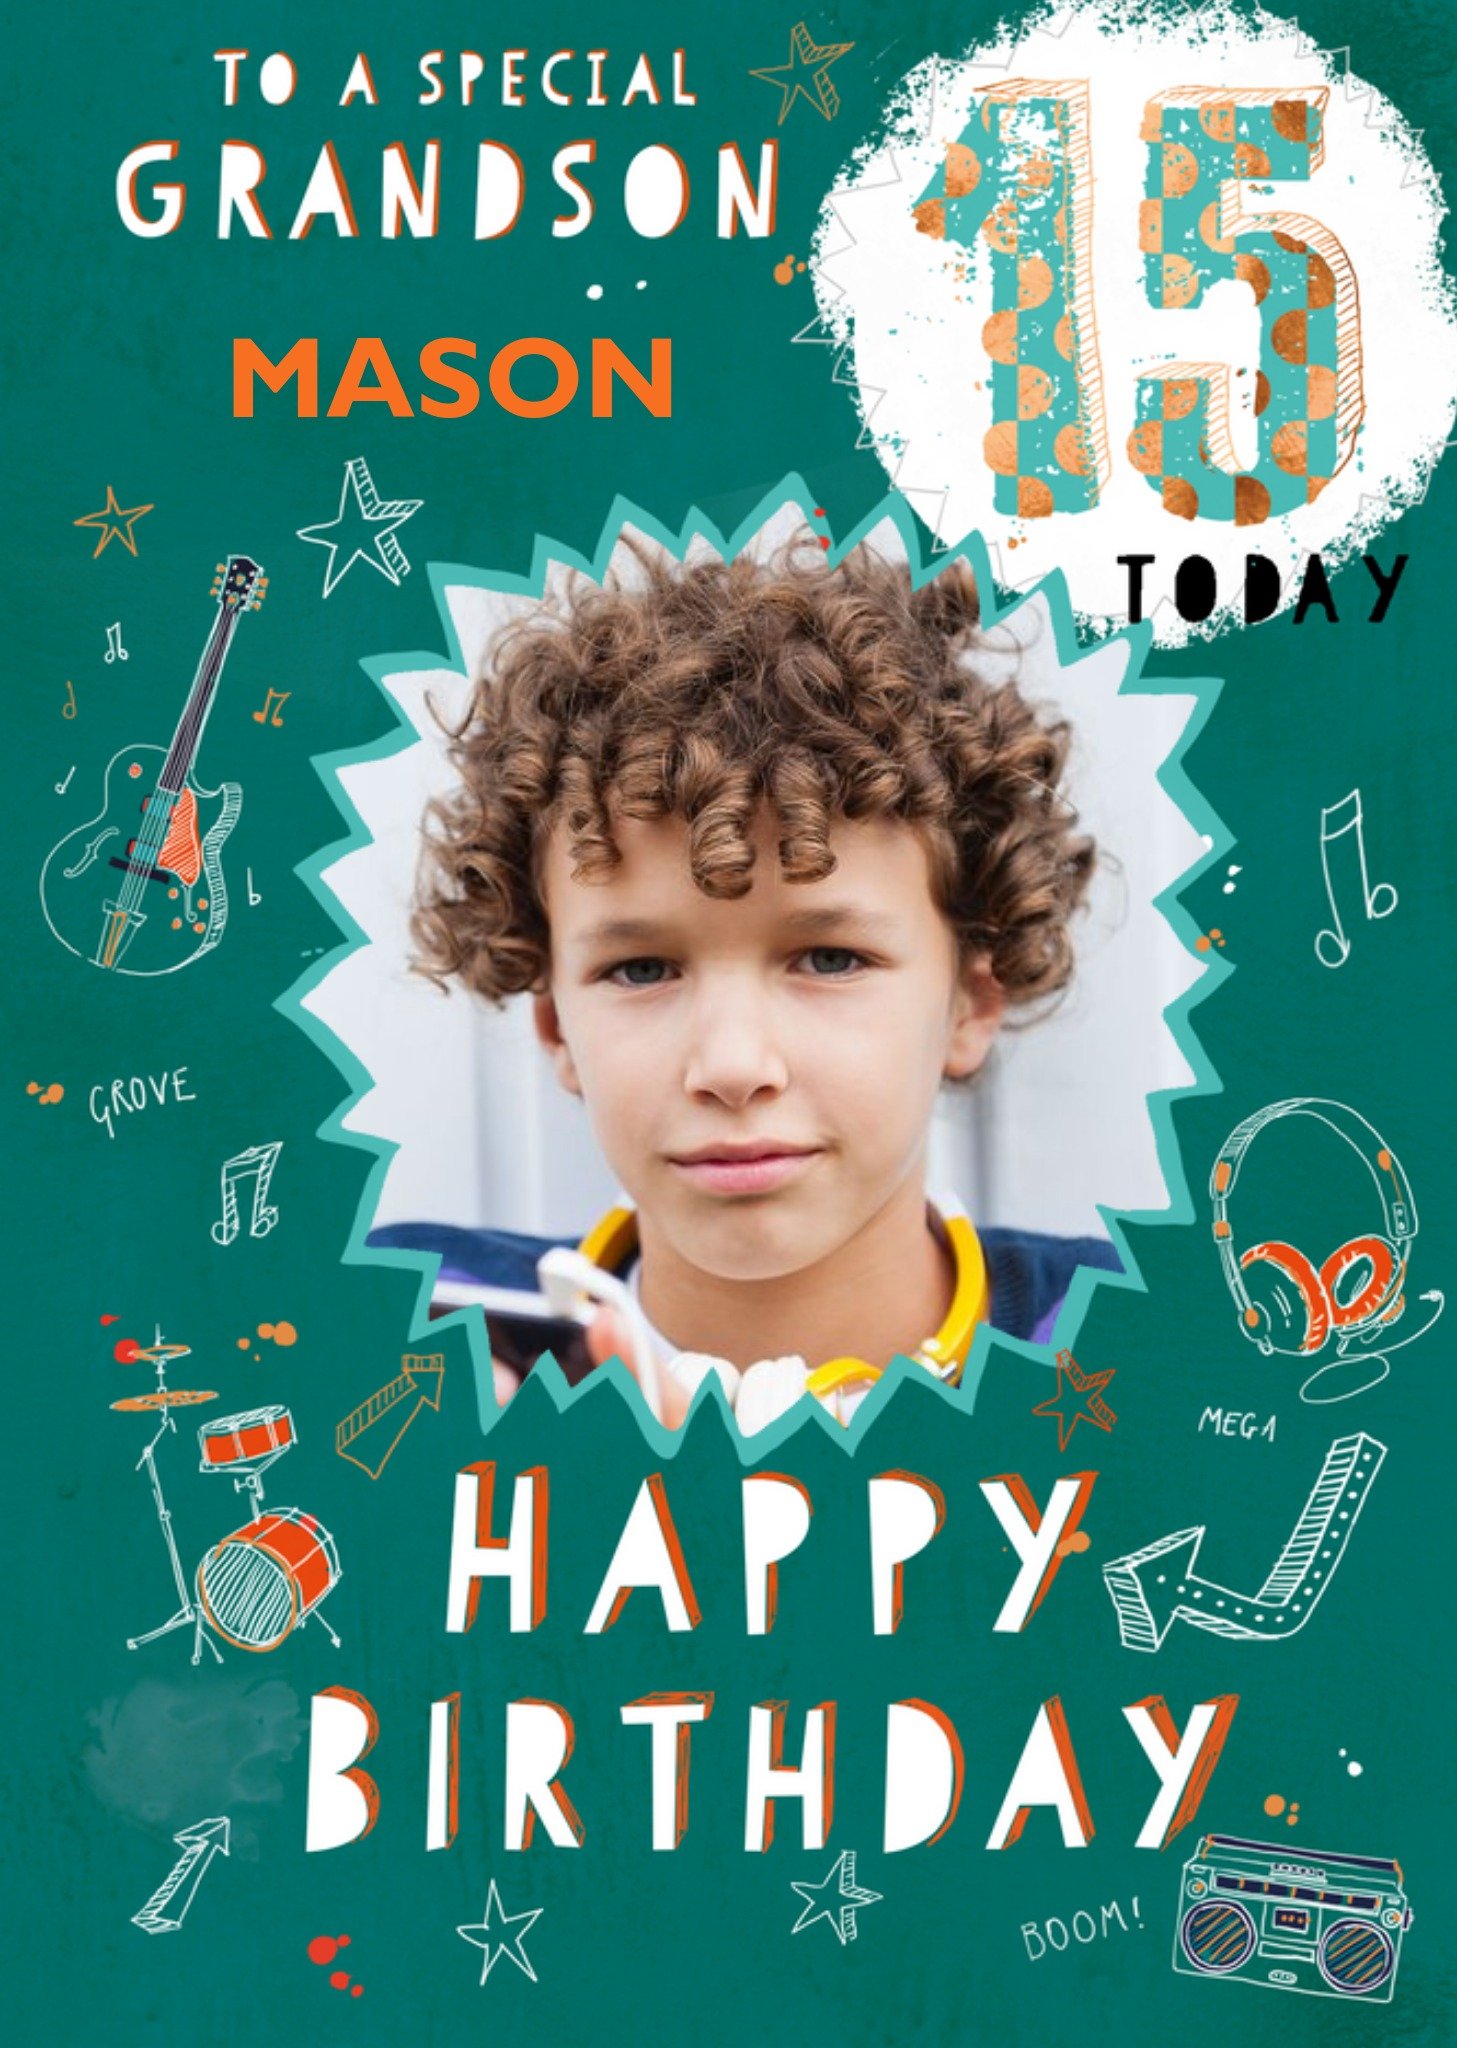 Ling Design Illustration Of A Guitar Headphones And A Drum Kit Grandson's Fifteenth Birthday Photo U